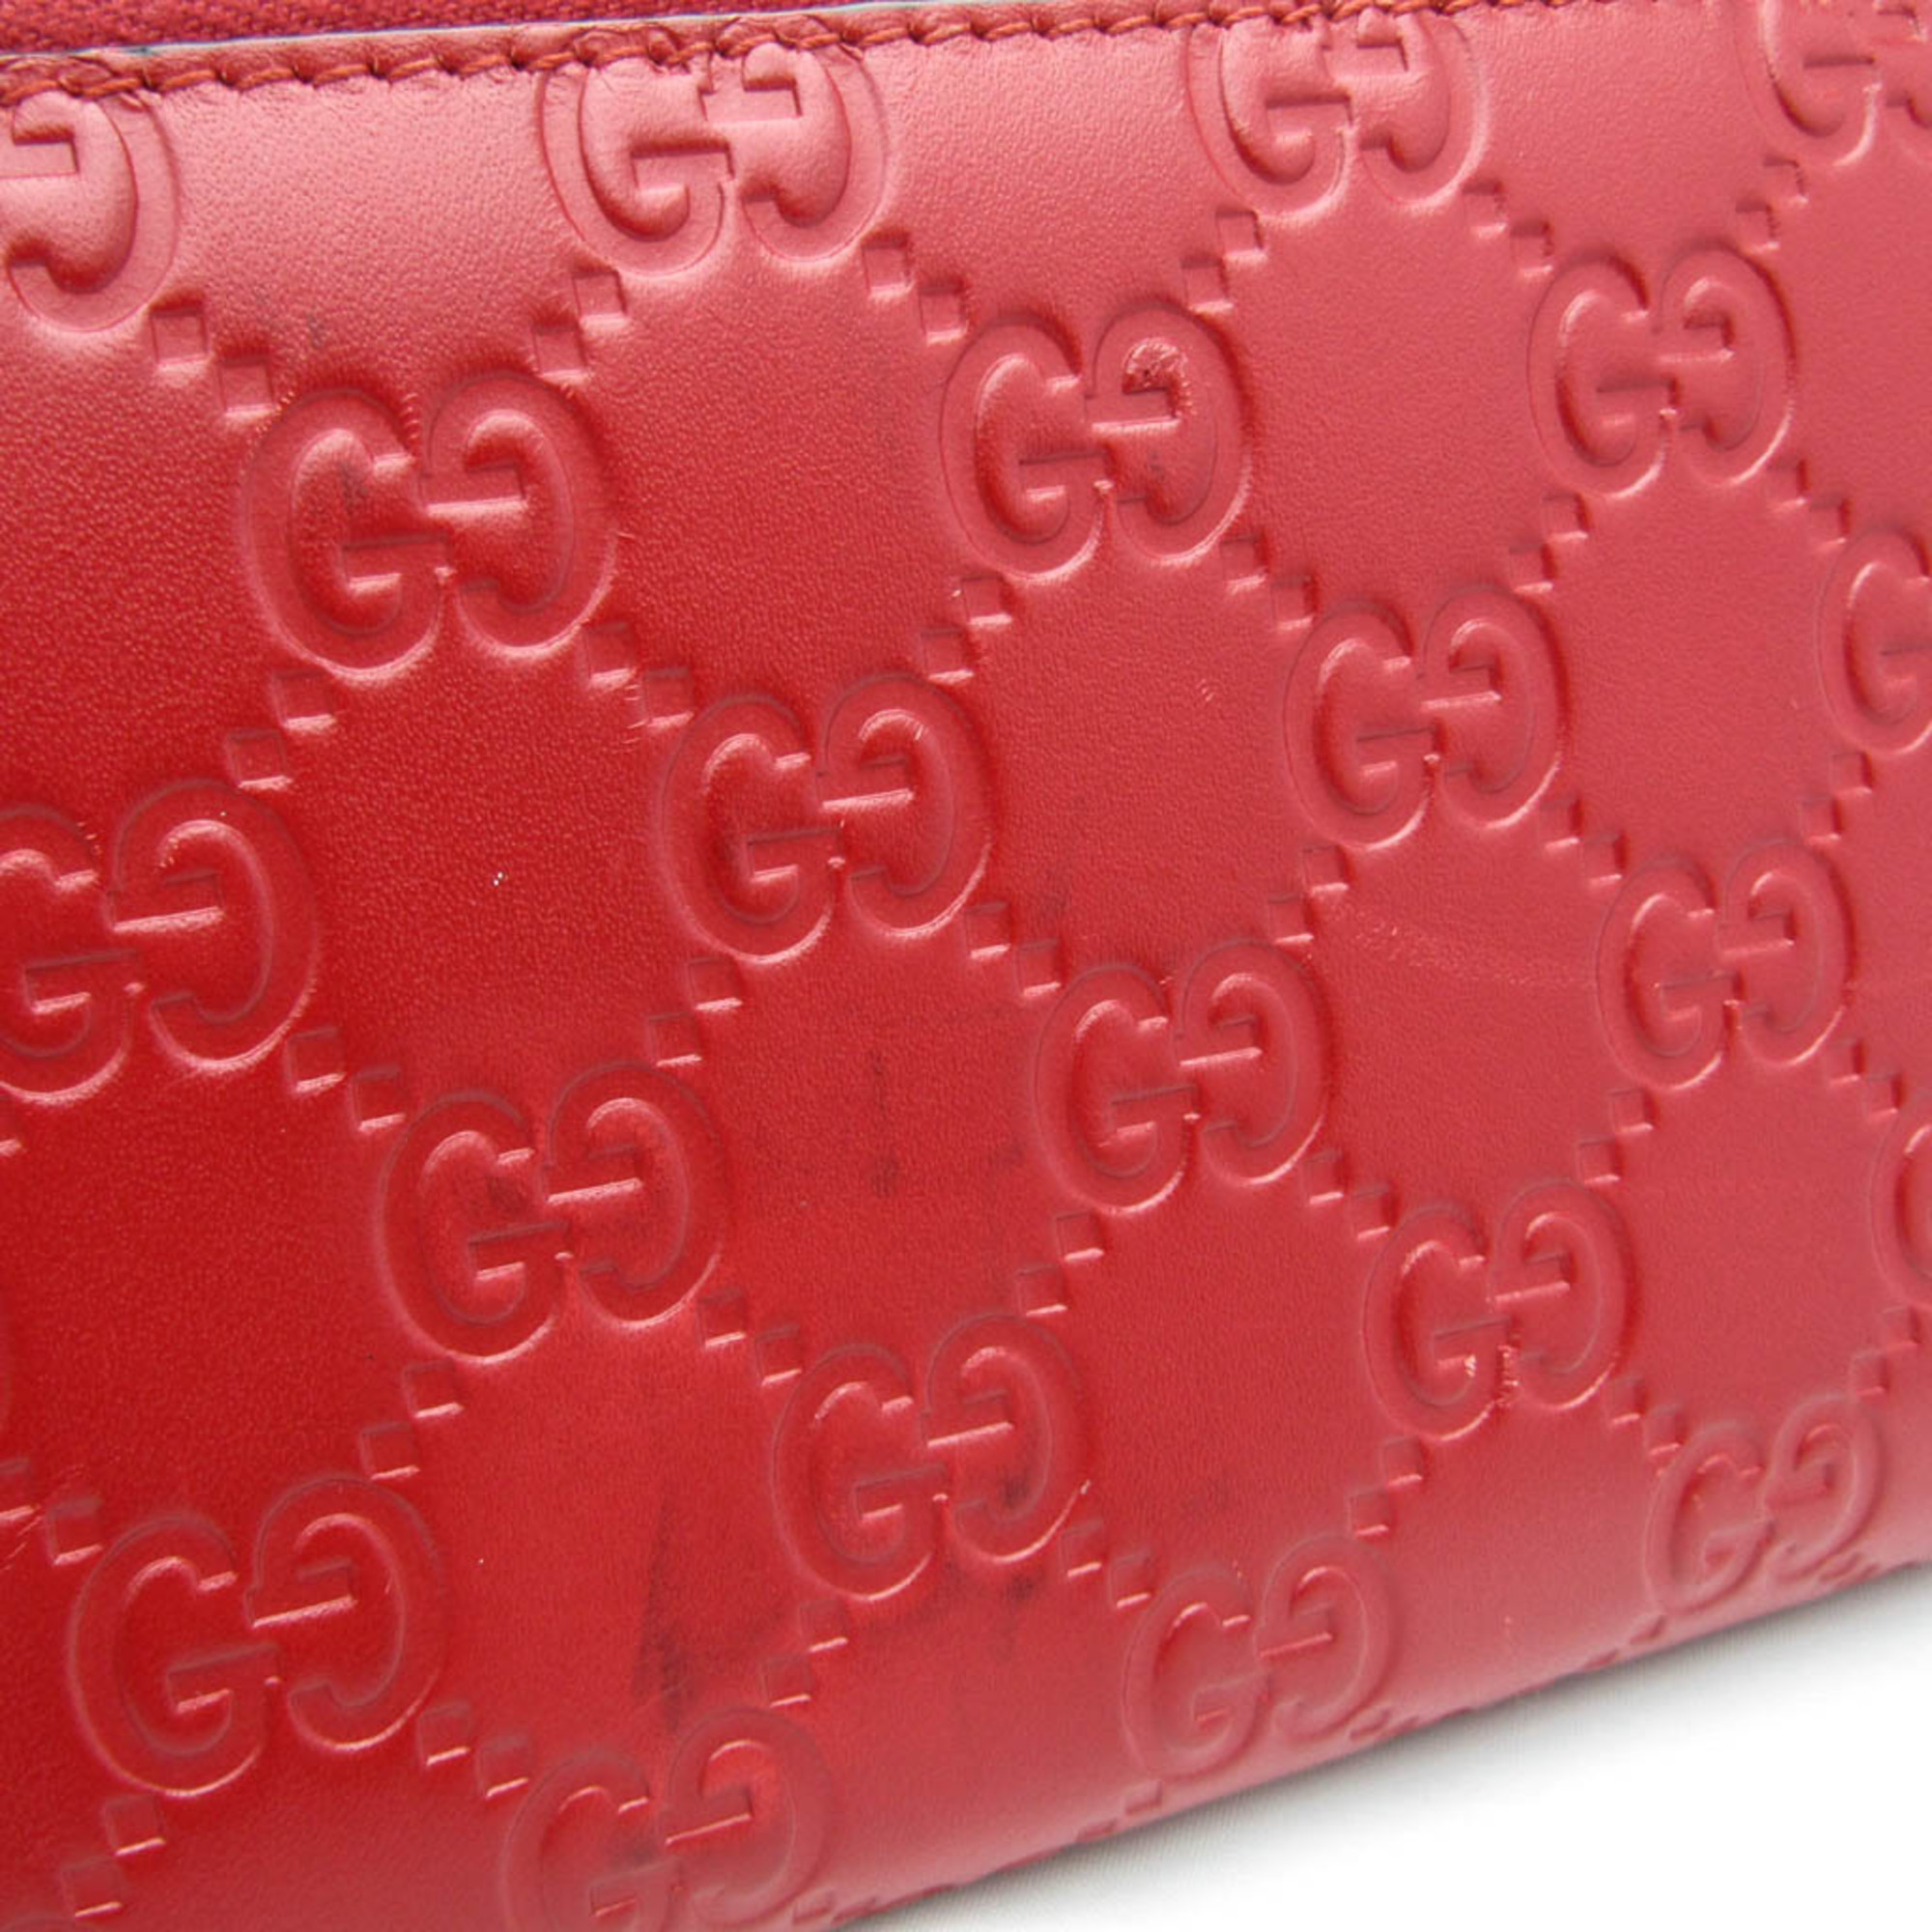 Gucci Guccissima 388680 GG Leather Long Wallet (bi-fold) Red Color